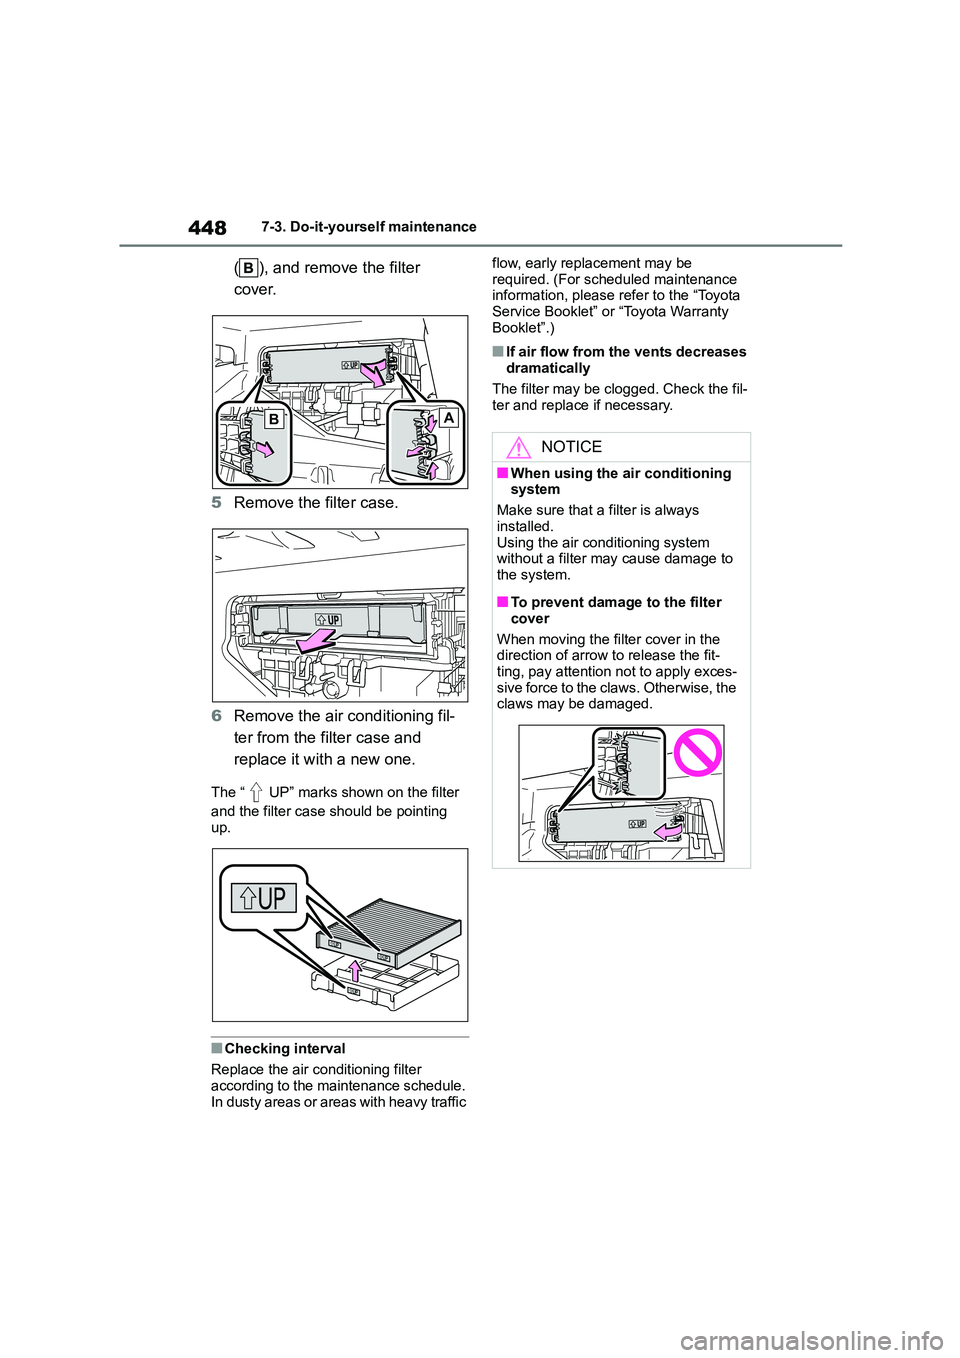 TOYOTA COROLLA 2022  Owners Manual (in English) 4487-3. Do-it-yourself maintenance
( ), and remove the filter  
cover. 
5 Remove the filter case. 
6 Remove the air conditioning fil- 
ter from the filter case and 
replace it with a new one.
The “ 